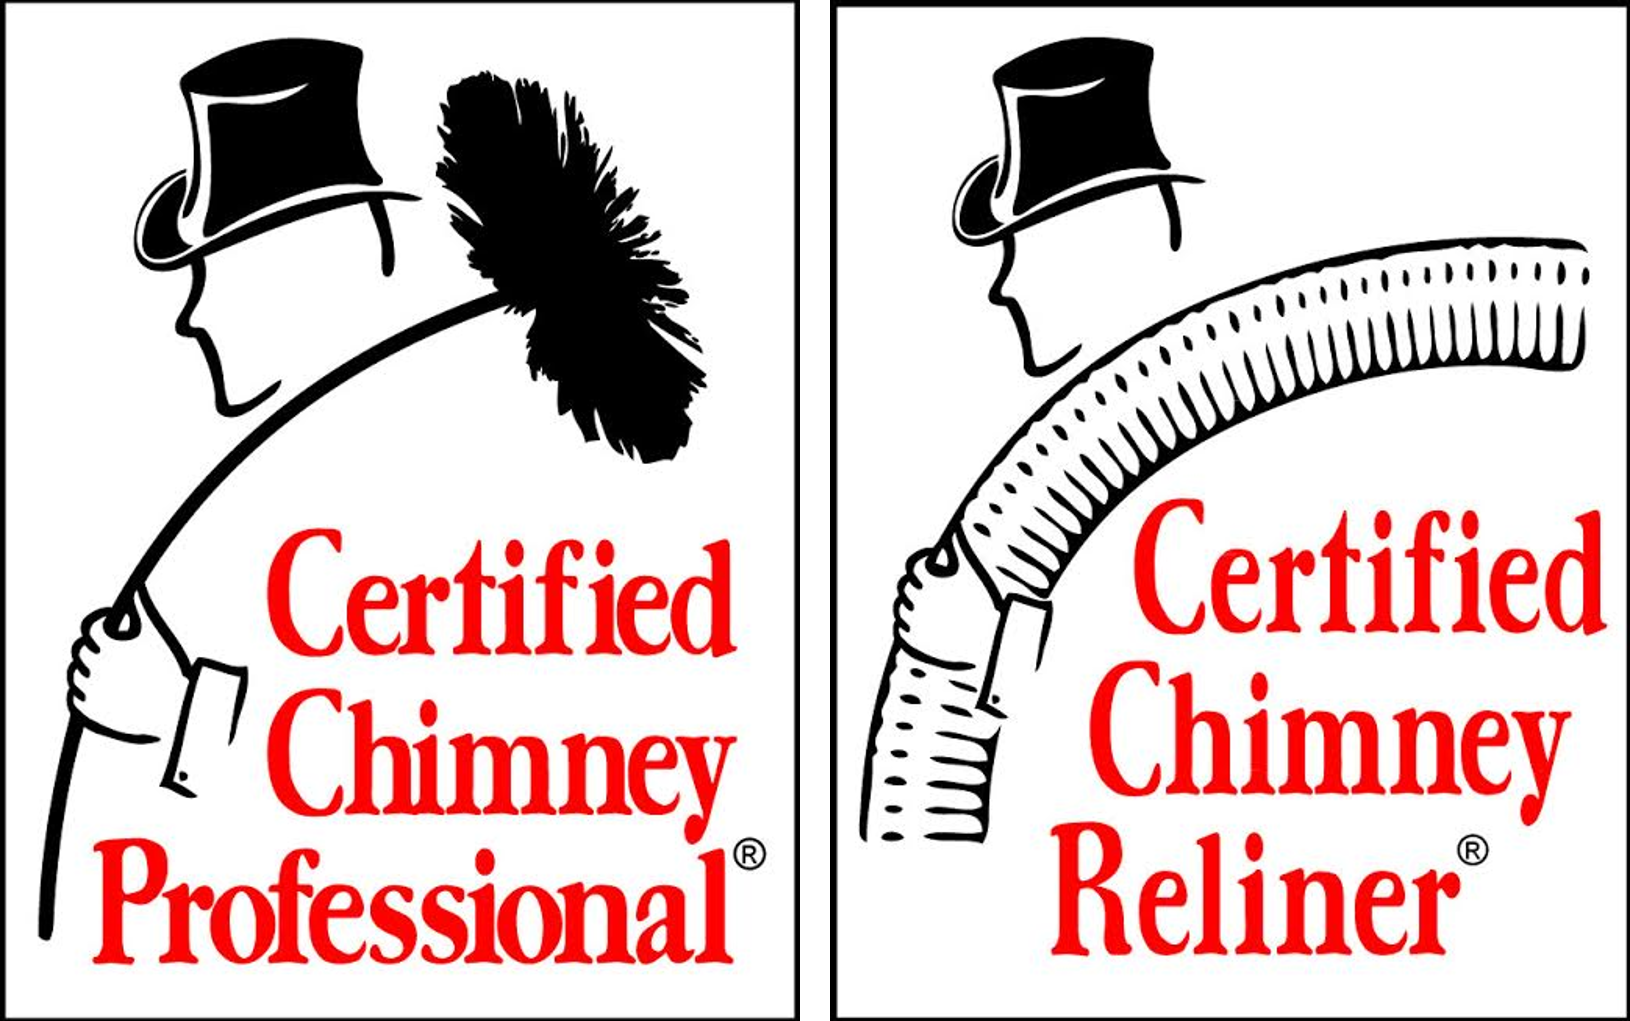 Certified Chimney Professionals Announces that 2nd Generation Chimneys